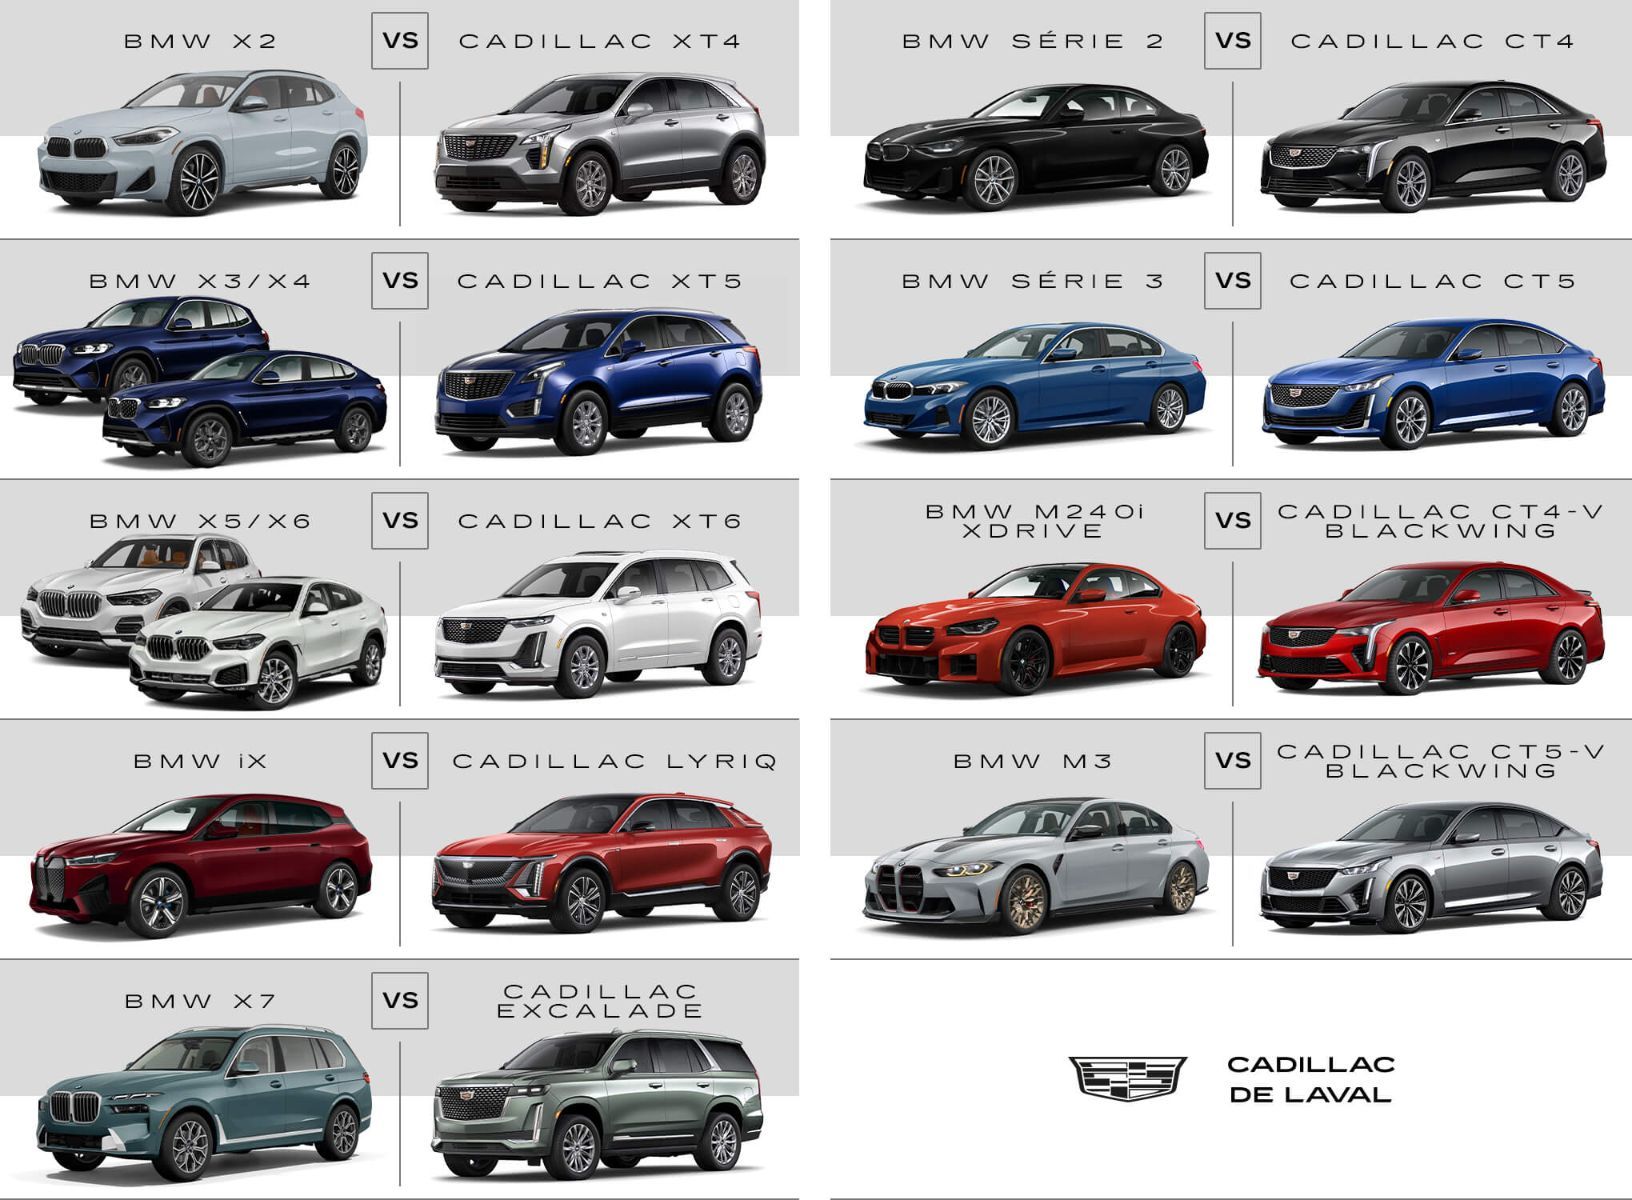 comparative chart of various BMW and Cadillac models